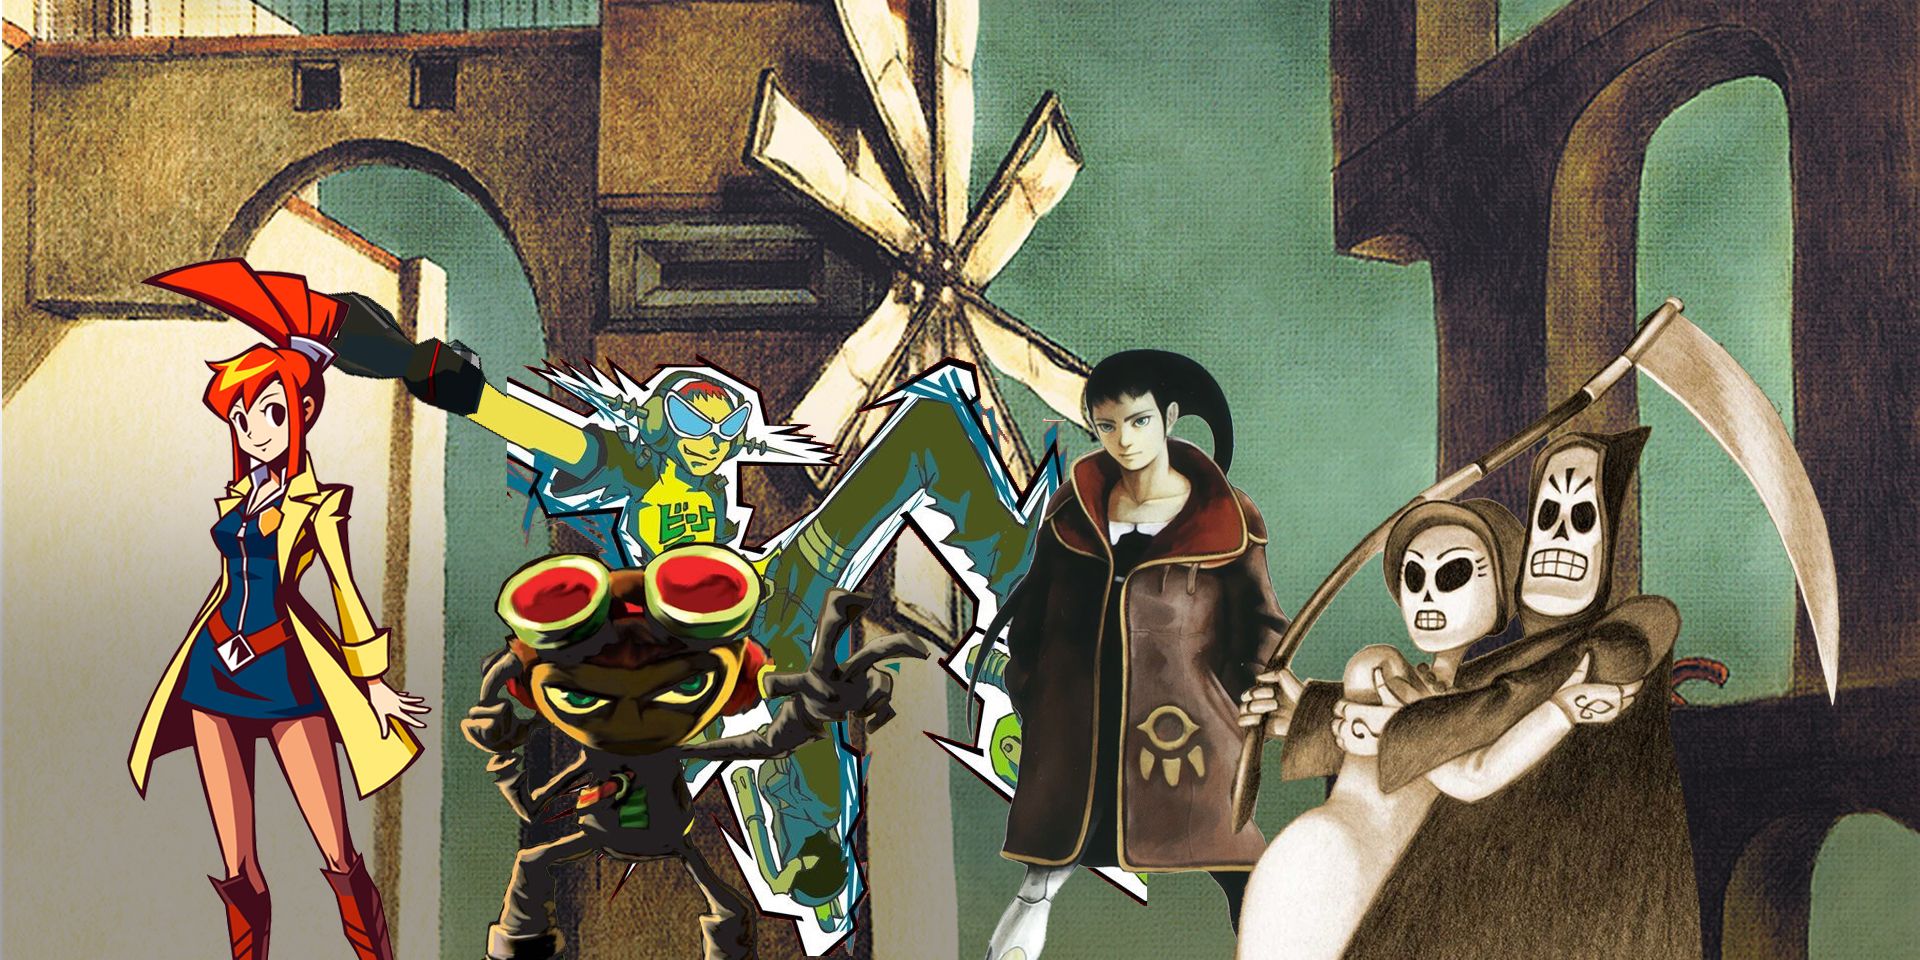 Collage of video game characters from Psychonauts, Grim Fandango, Ico and more